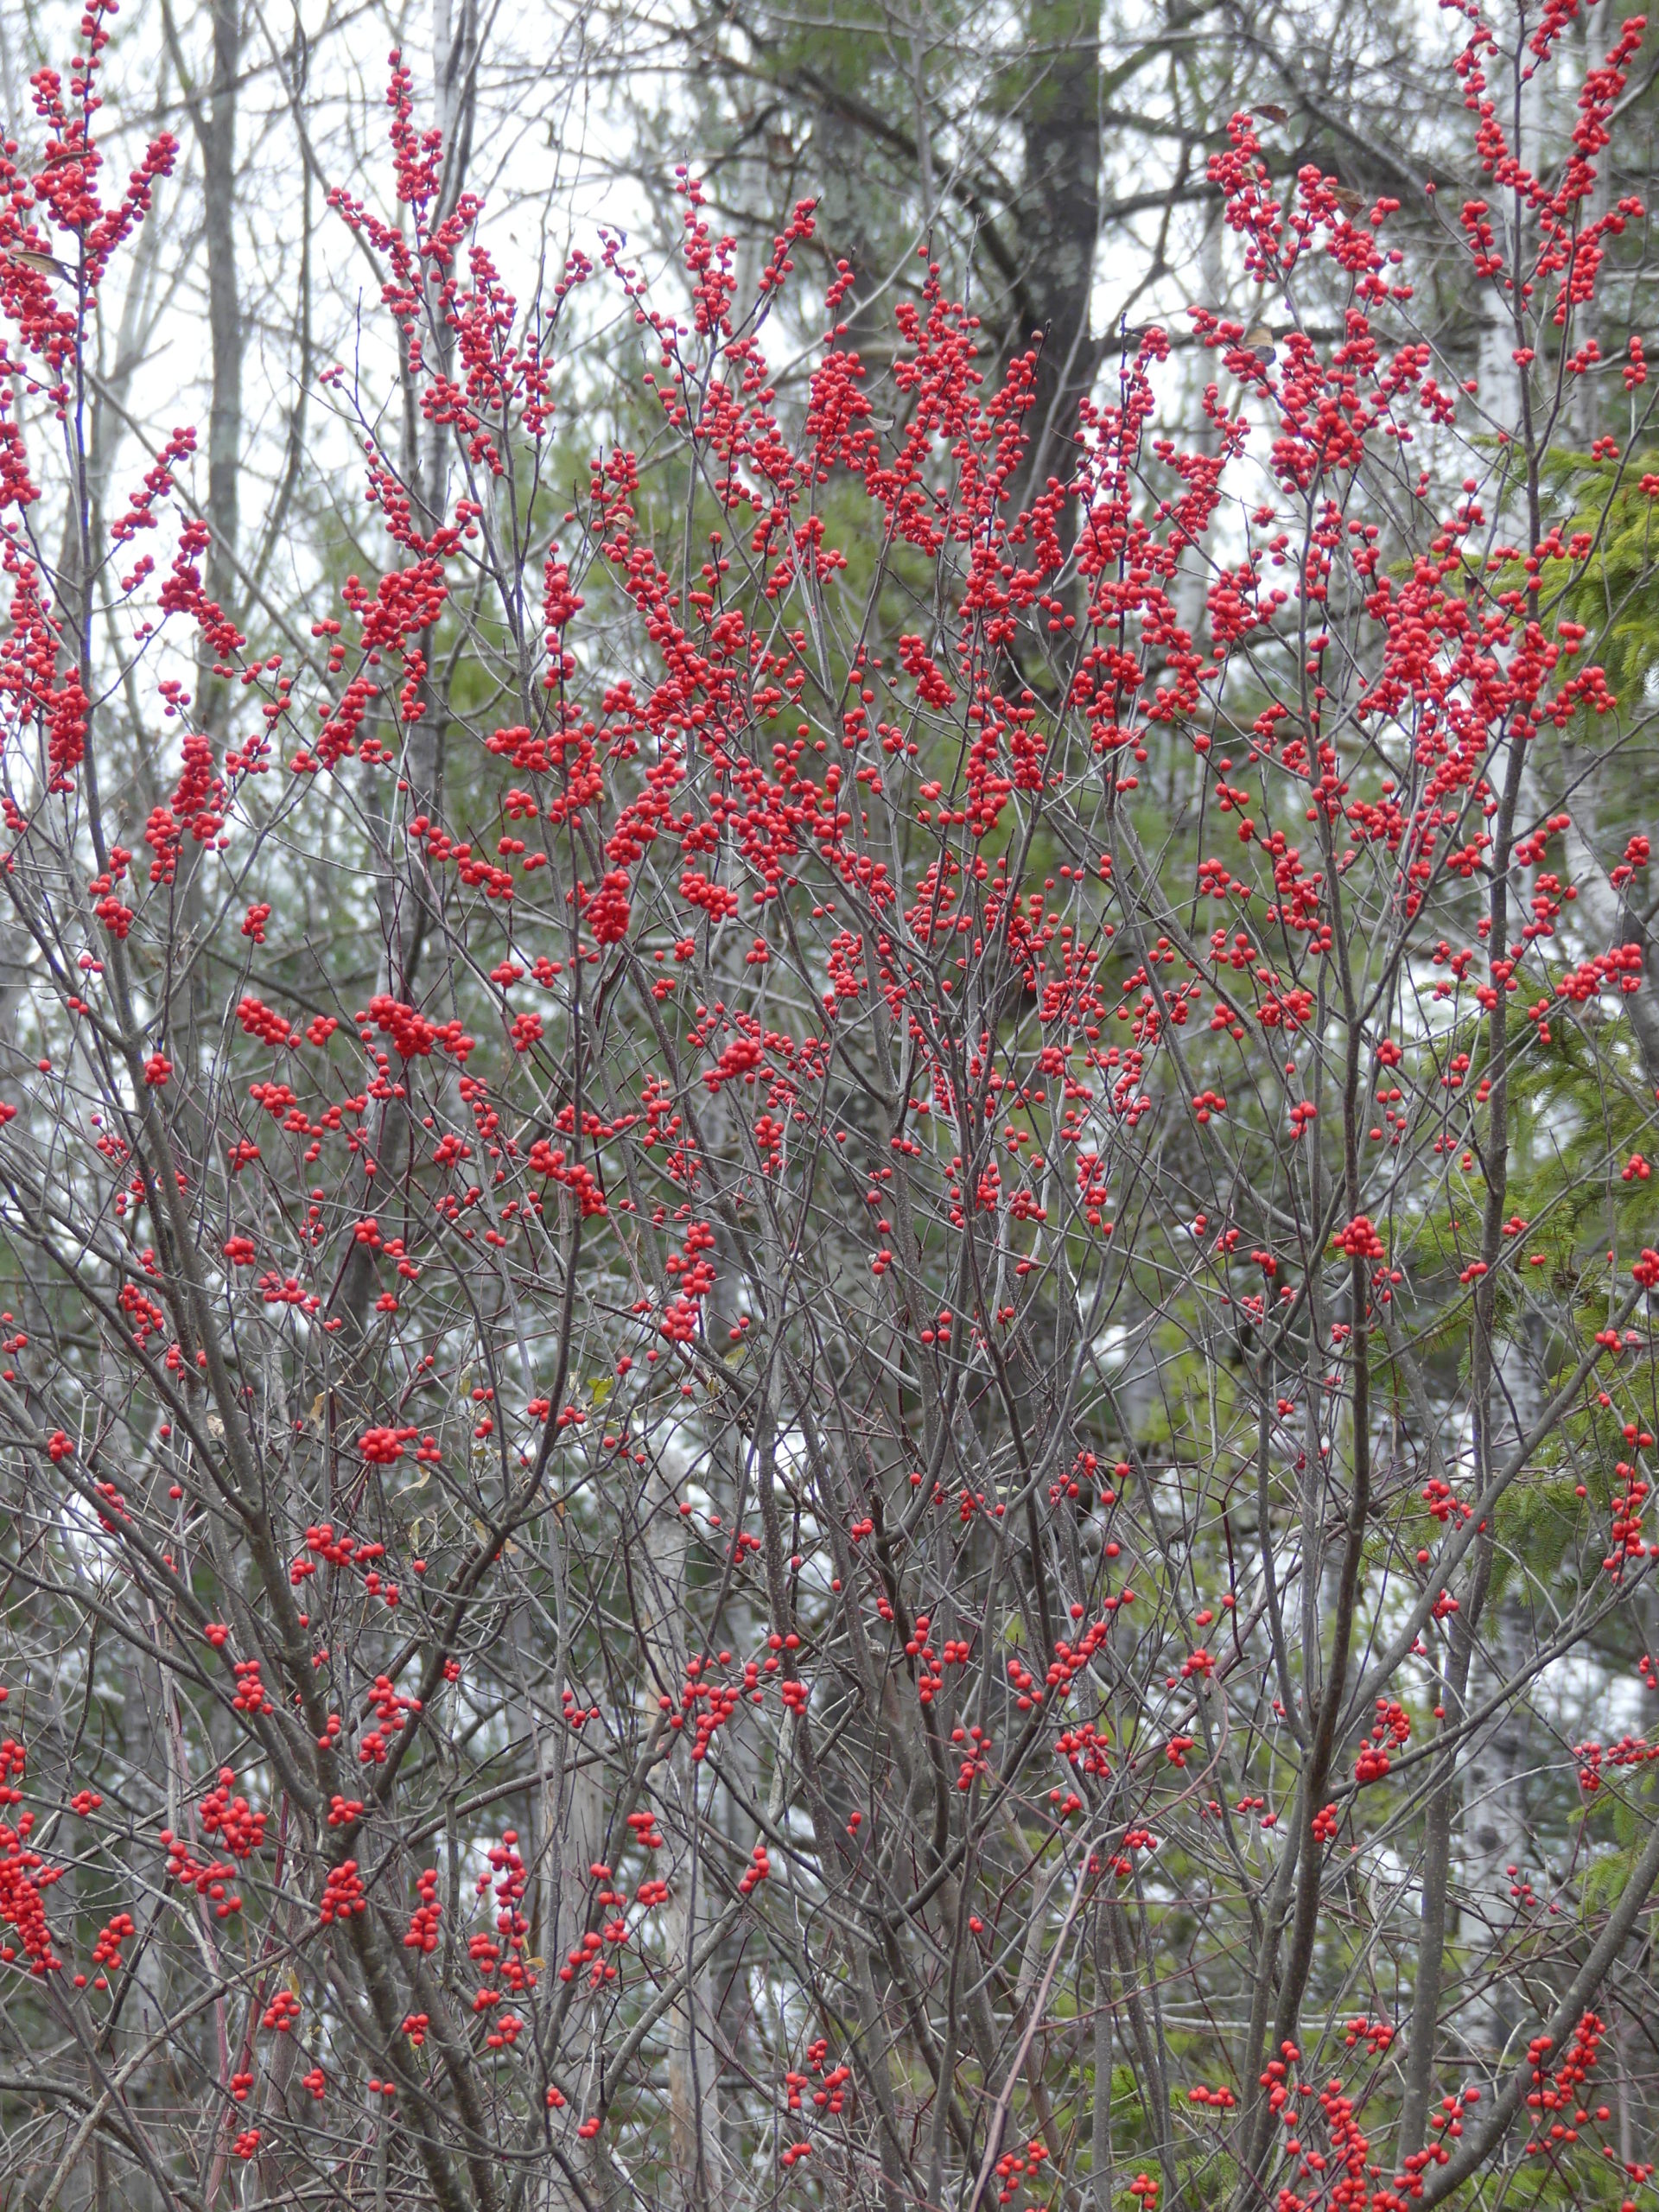 The native Ilex verticillata, or common winterberry, can be confused with the bittersweet, but the winterberry’s fruits are a bright red and born on stems, not vines. This shrub or small tree can grow up to 14 feet tall. The winterberry prefers wet soils while the bittersweet isn’t that choosy. Both live at the edge of the woods.